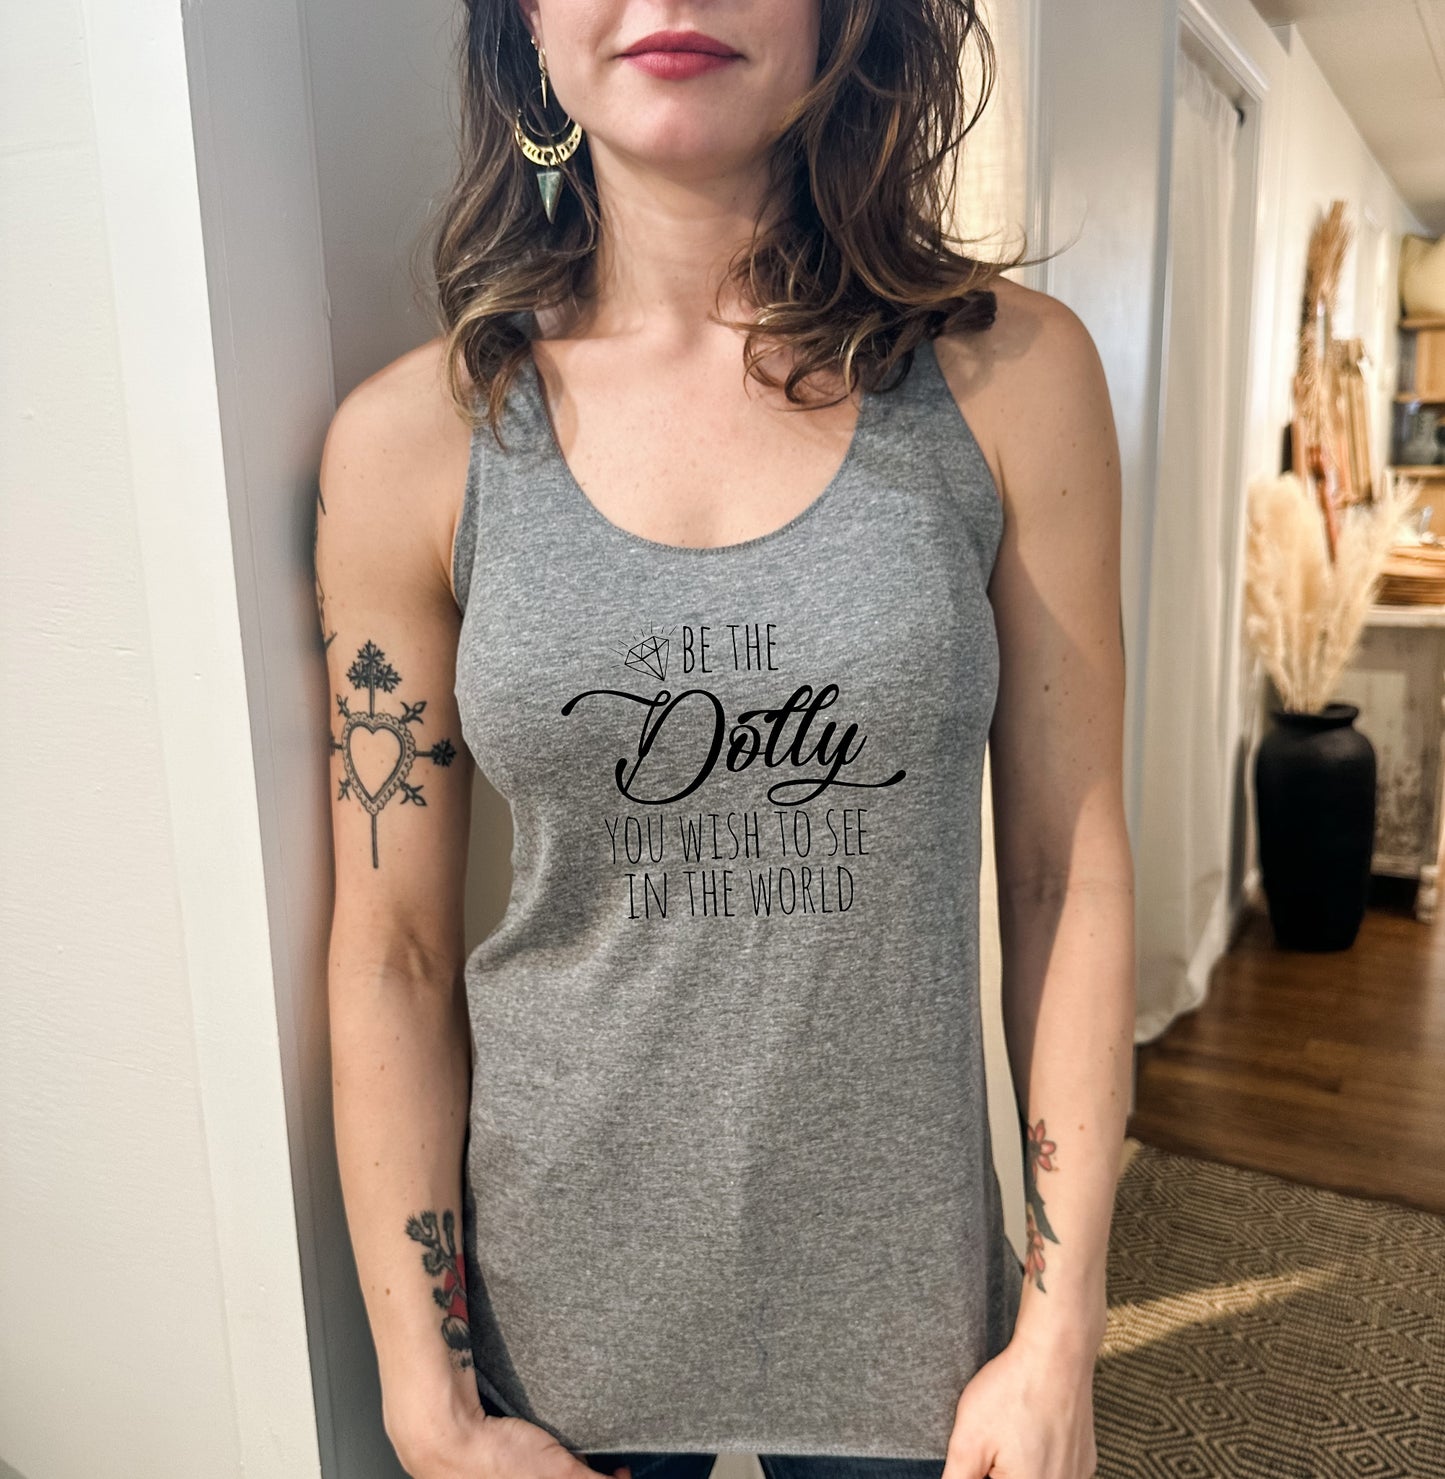 Be the Dolly You Wish to See in the World (Dolly Parton) - Women's Tank - Heather Gray, Tahiti, or Envy